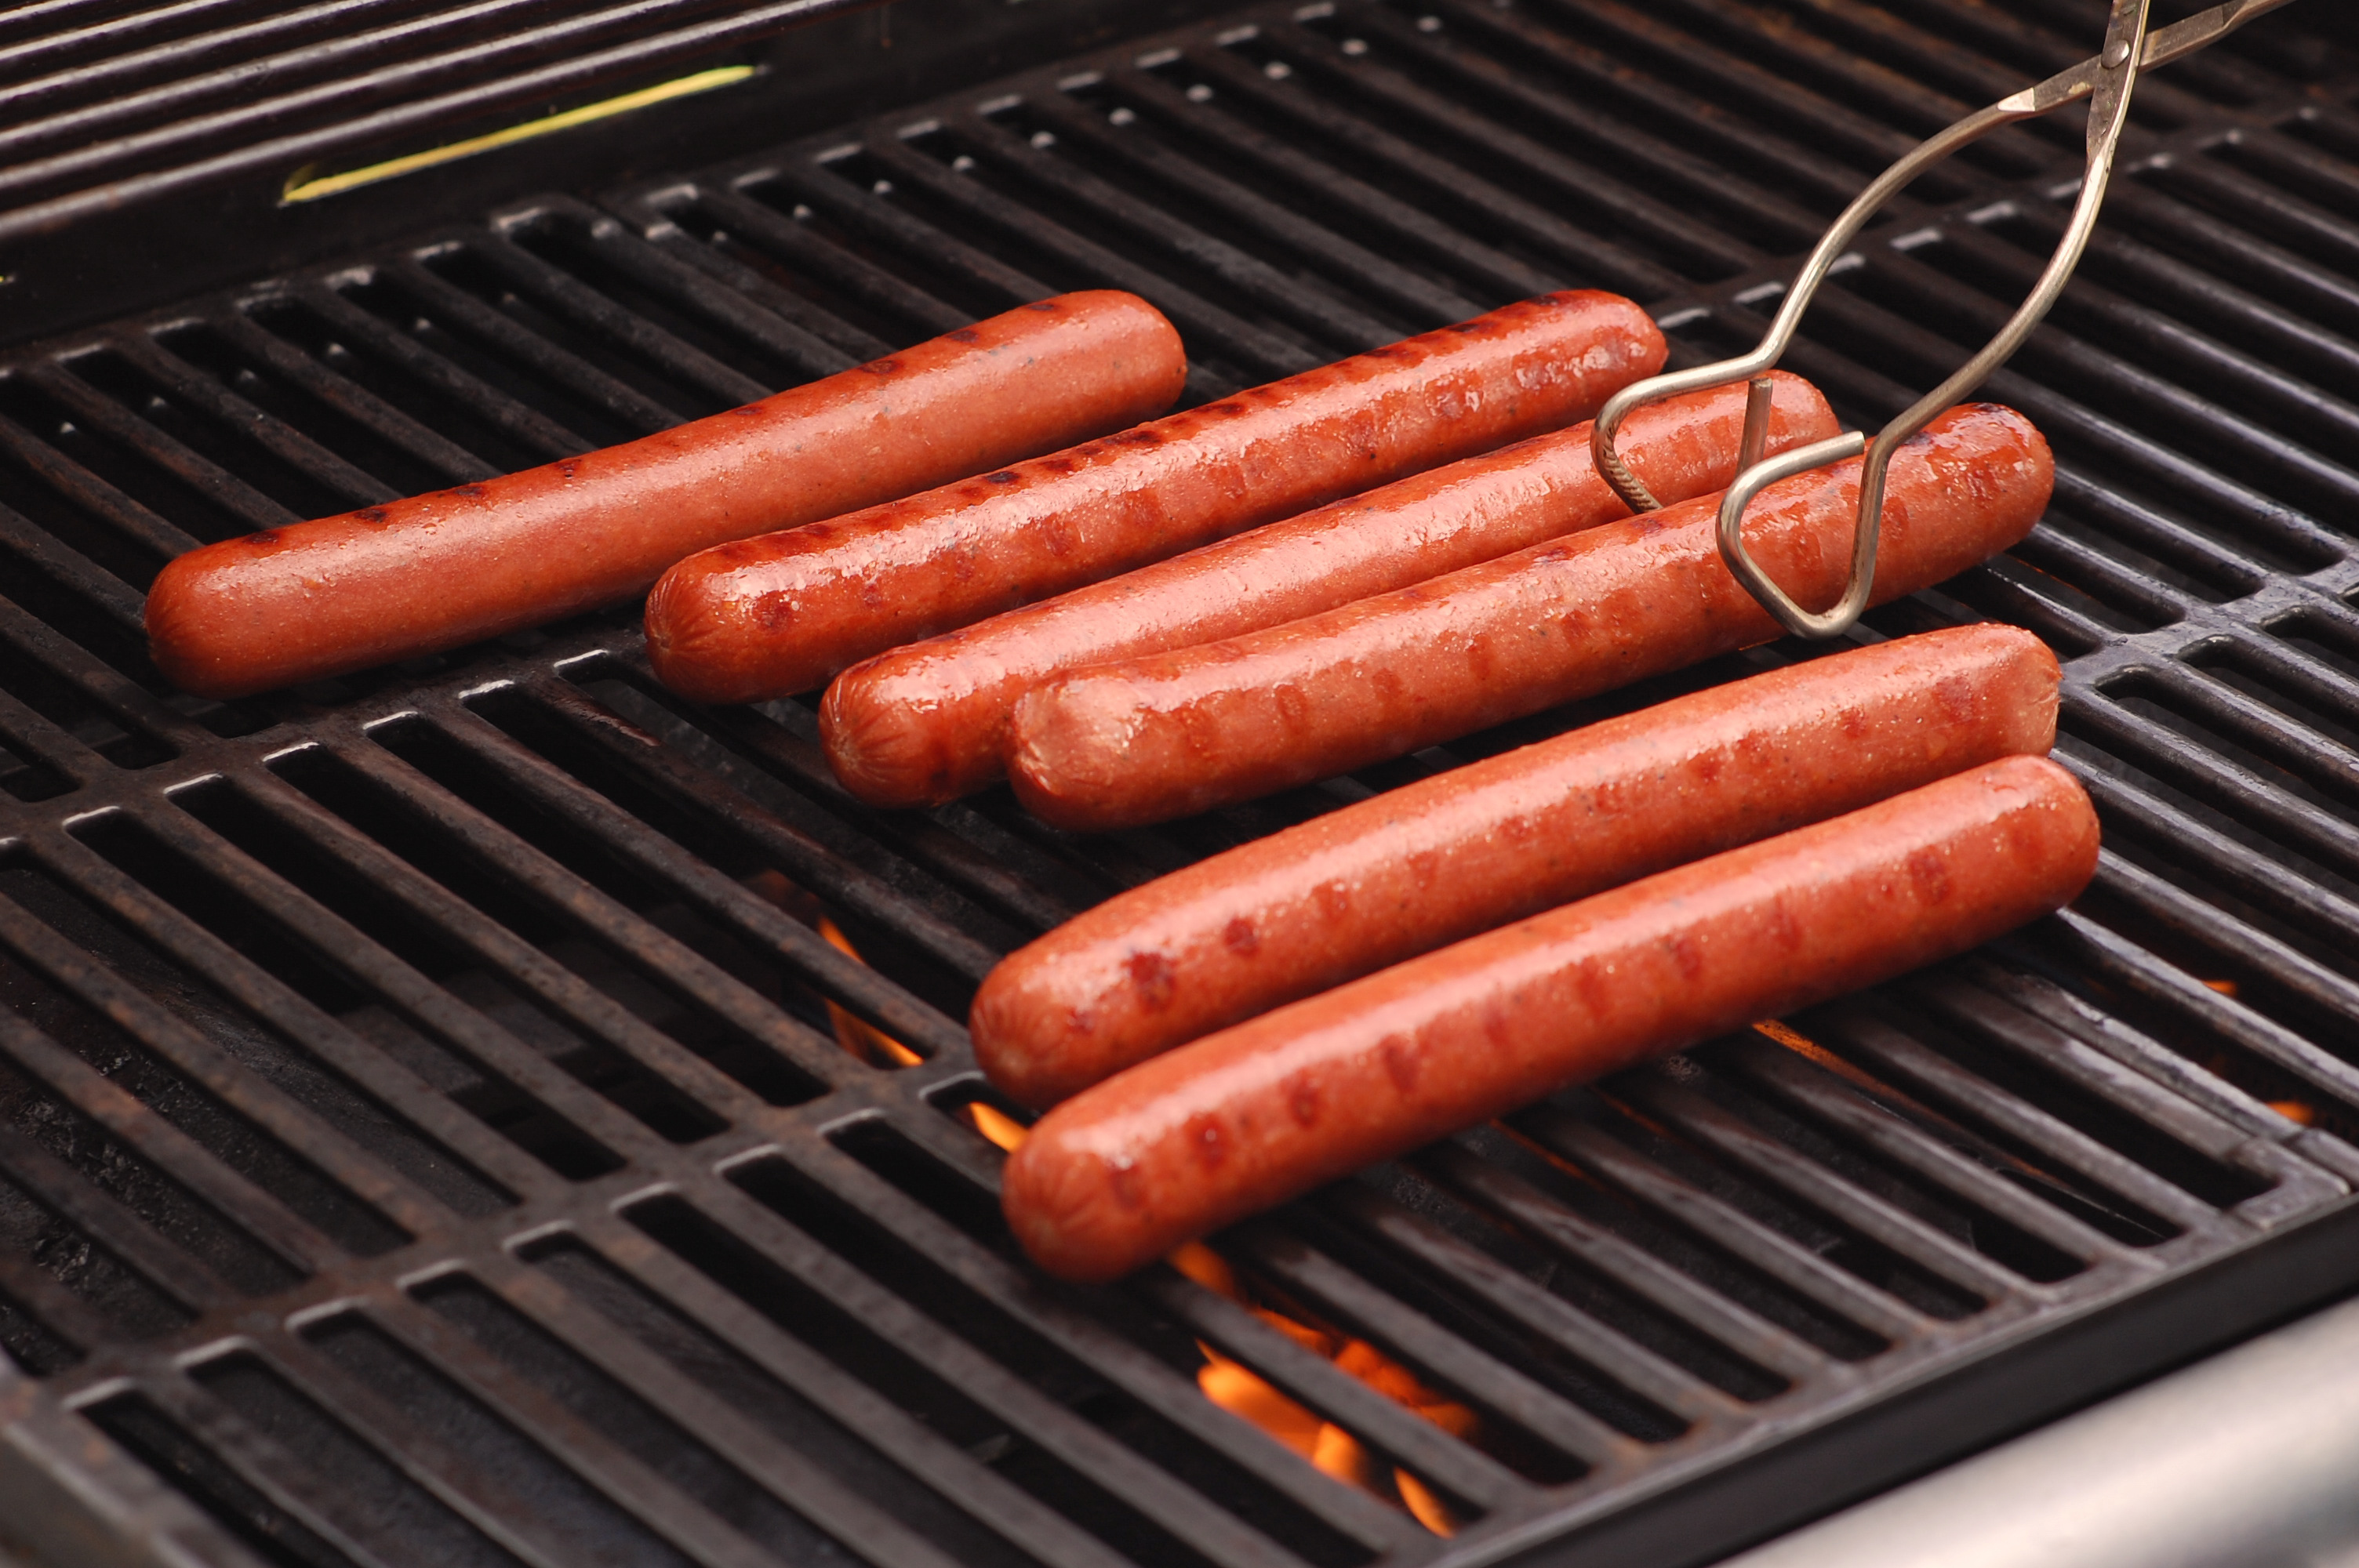 Six hot dogs cooking on a gas-fired barbeque grill. (Matt Carey—Getty Images)